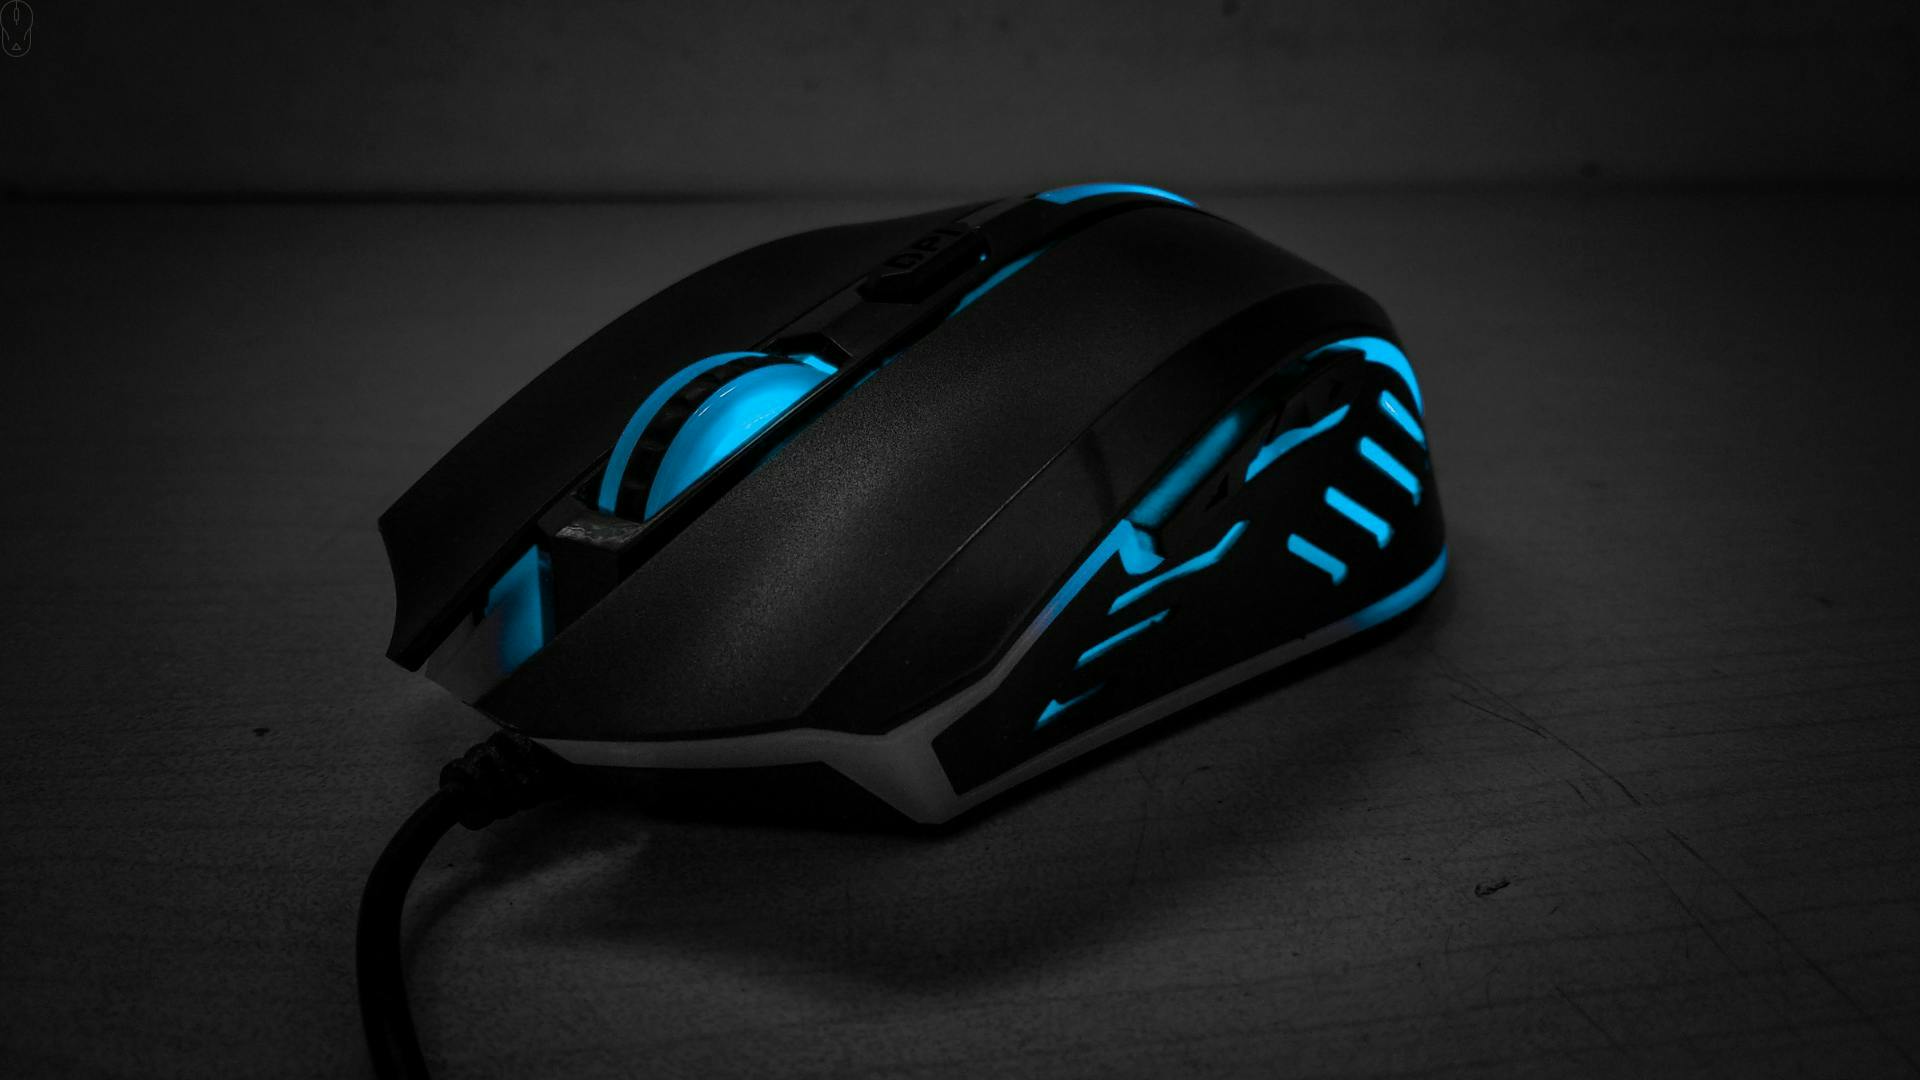 How does setting up a gaming mouse work? It's really simple!